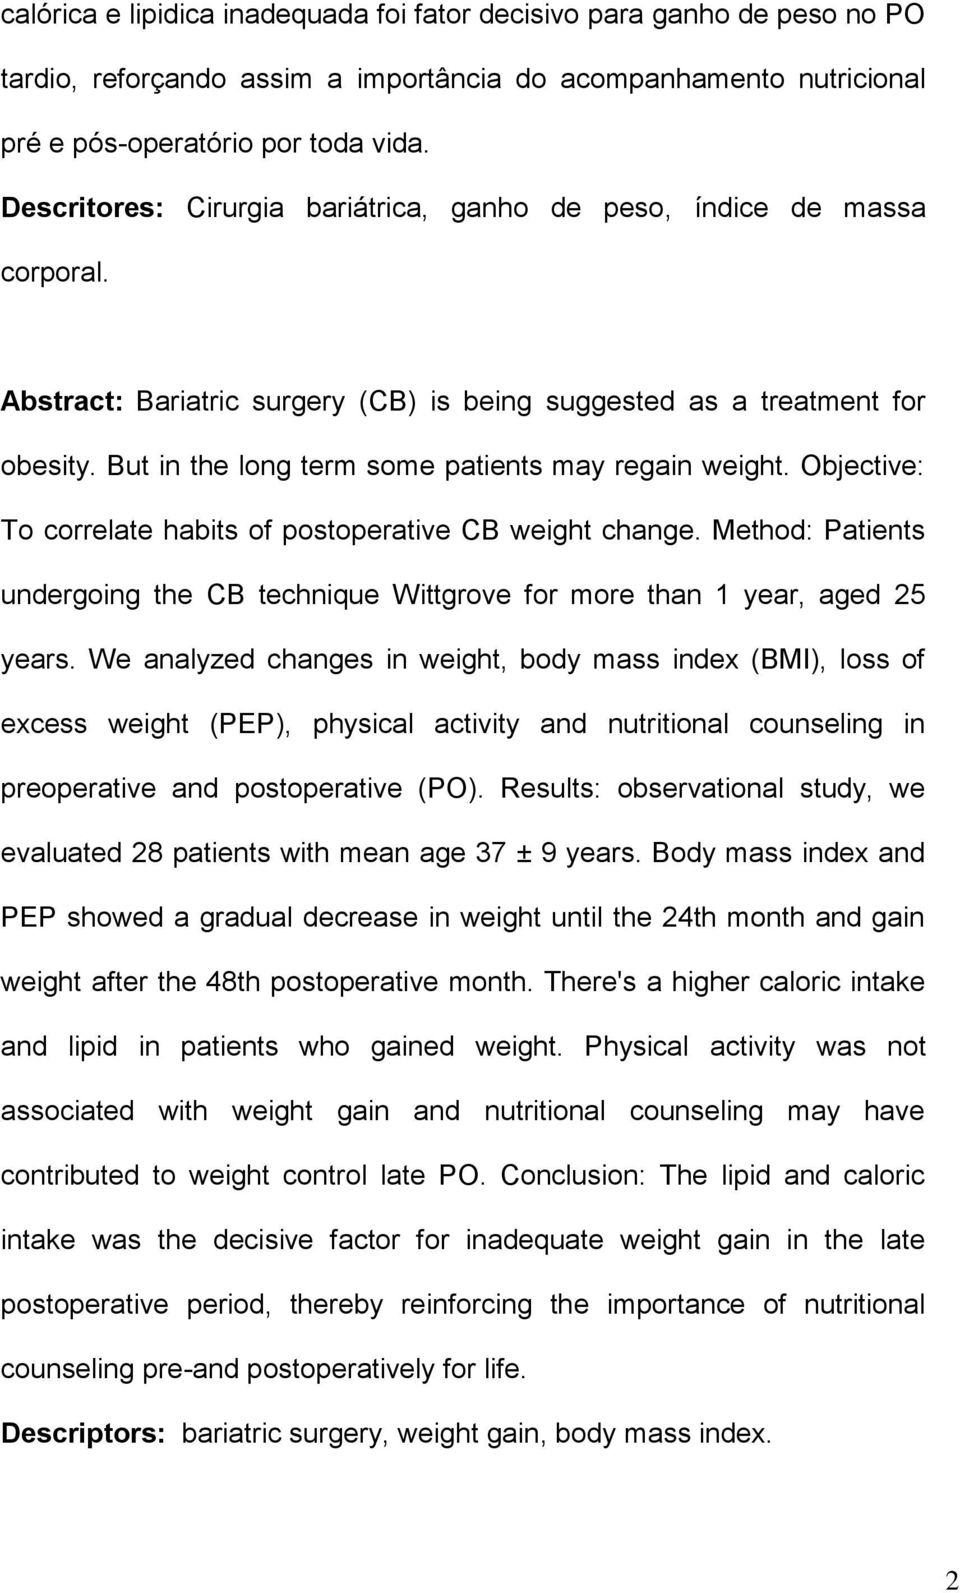 But in the long term some patients may regain weight. Objective: To correlate habits of postoperative CB weight change.